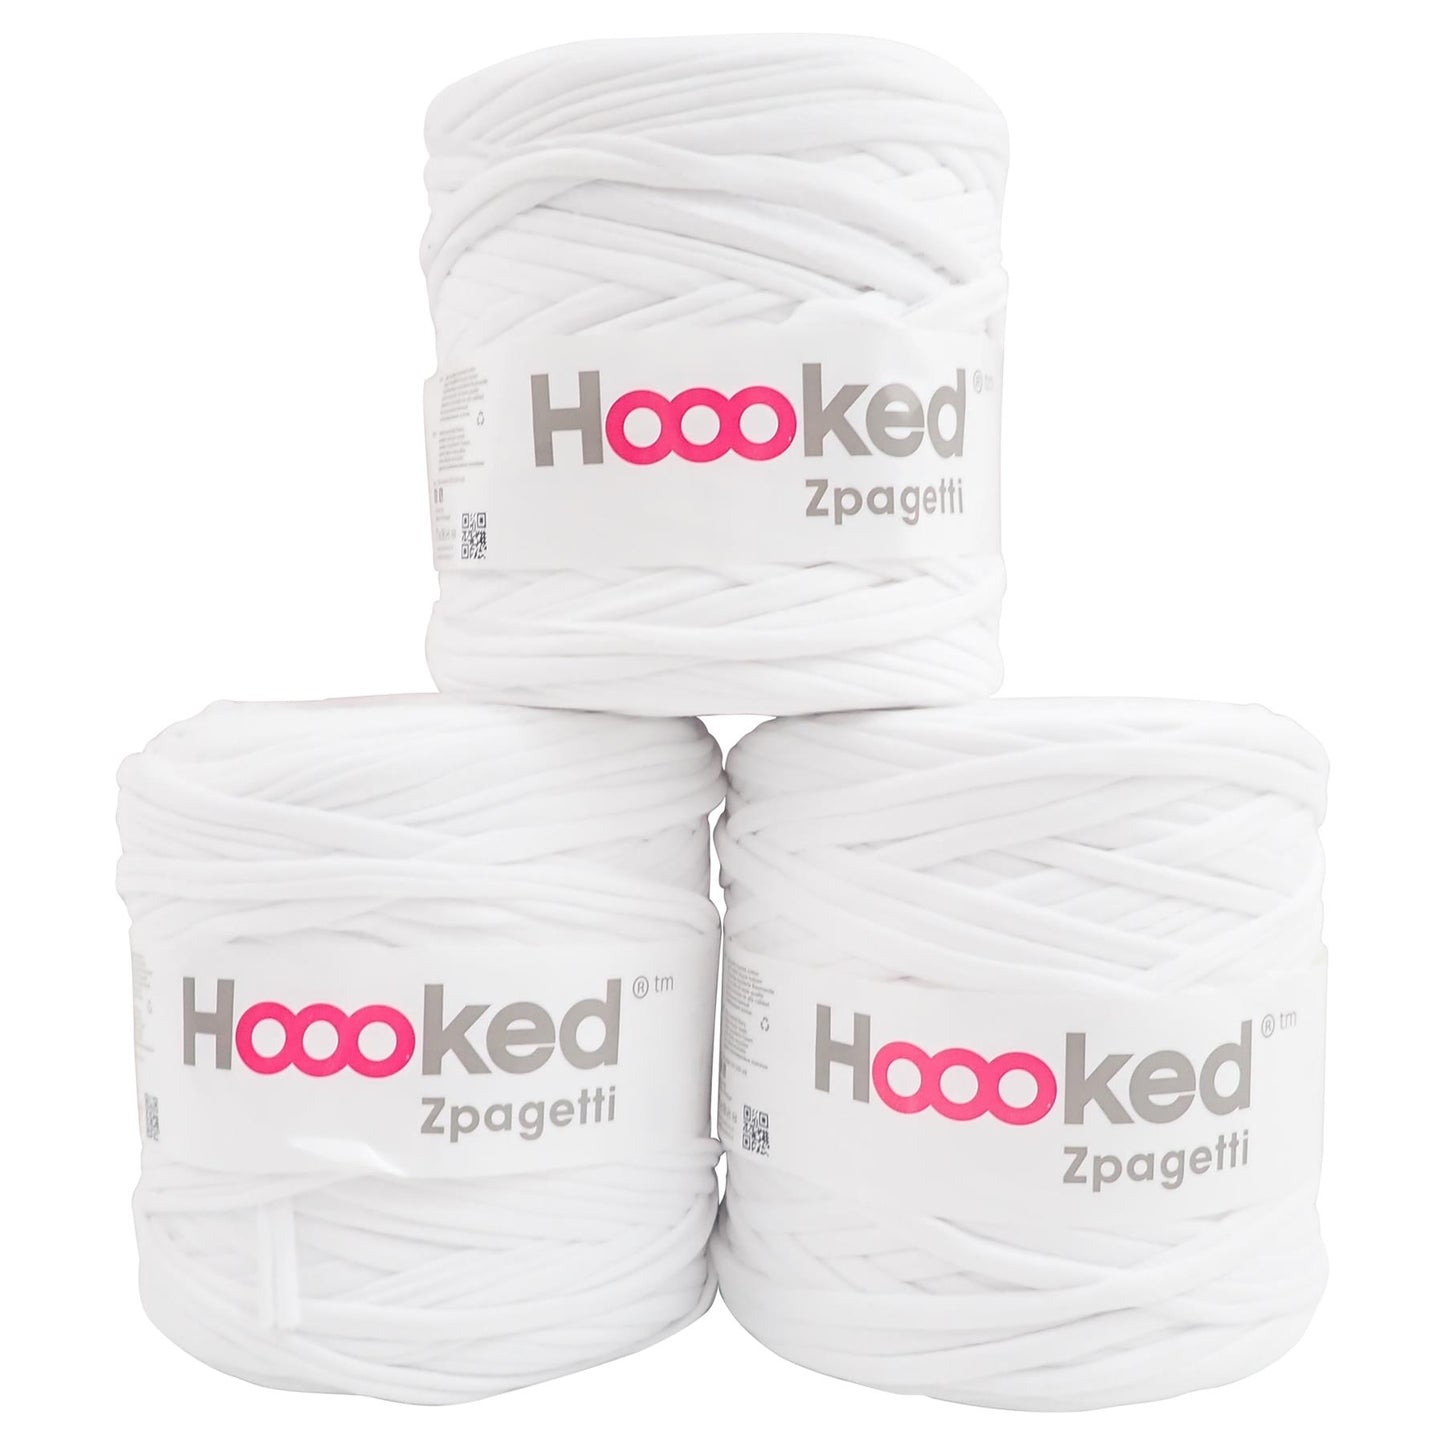 Hoooked Zpagetti White Cotton T-Shirt Yarn - 120M 700g (Pack of 3)